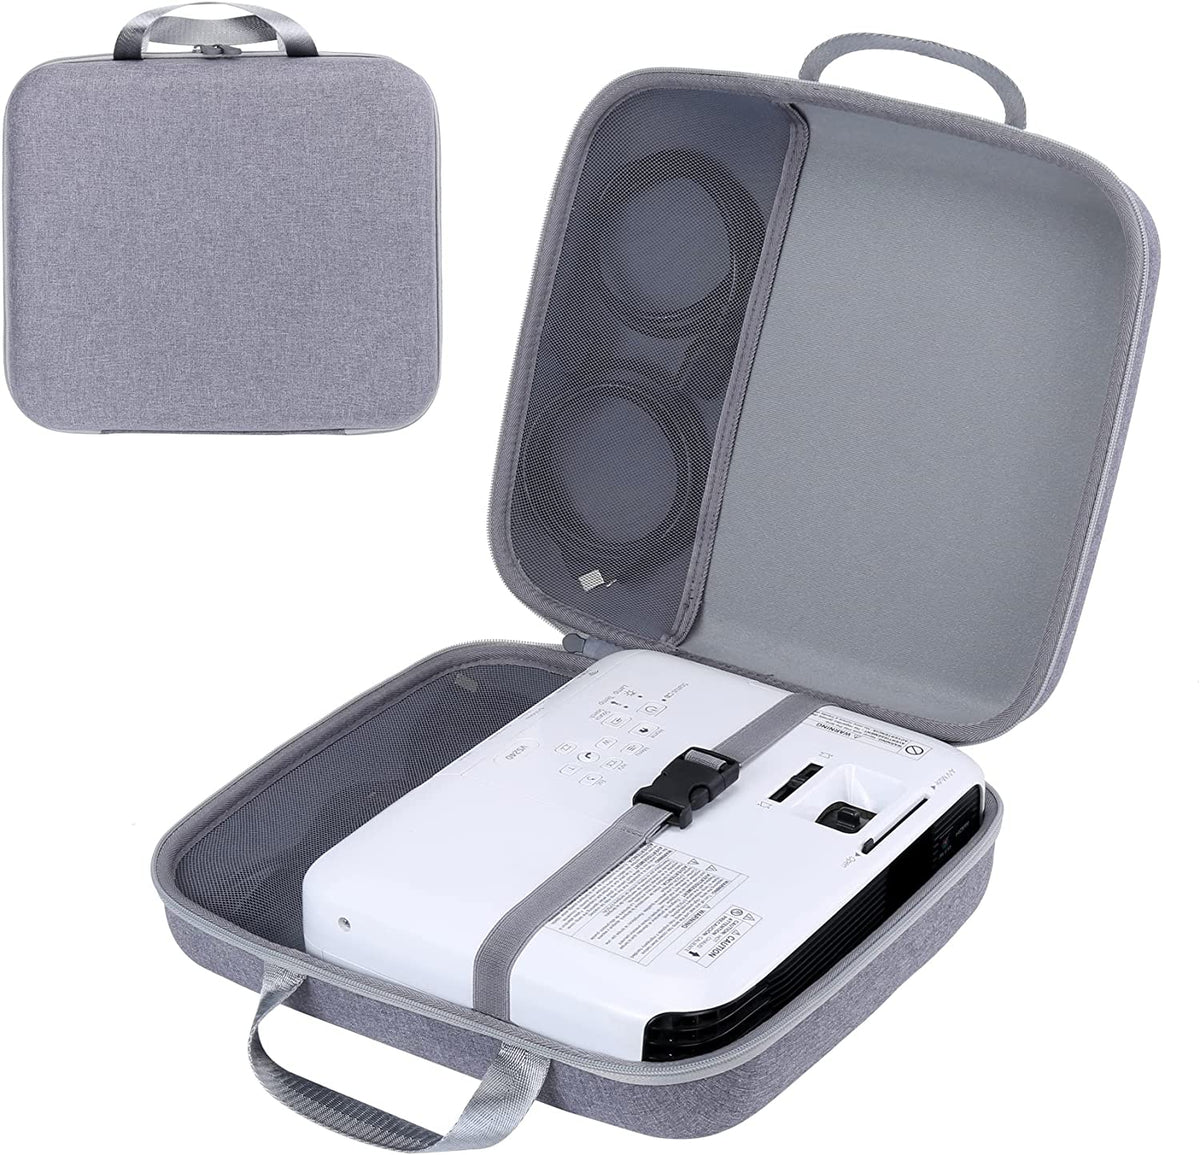 Aenllosi Hard Carrying Case Replacement for Epson VS260/EX7280/EX3280/EX5280/880/1080/CO-W01 SVGA 3LCD Projector